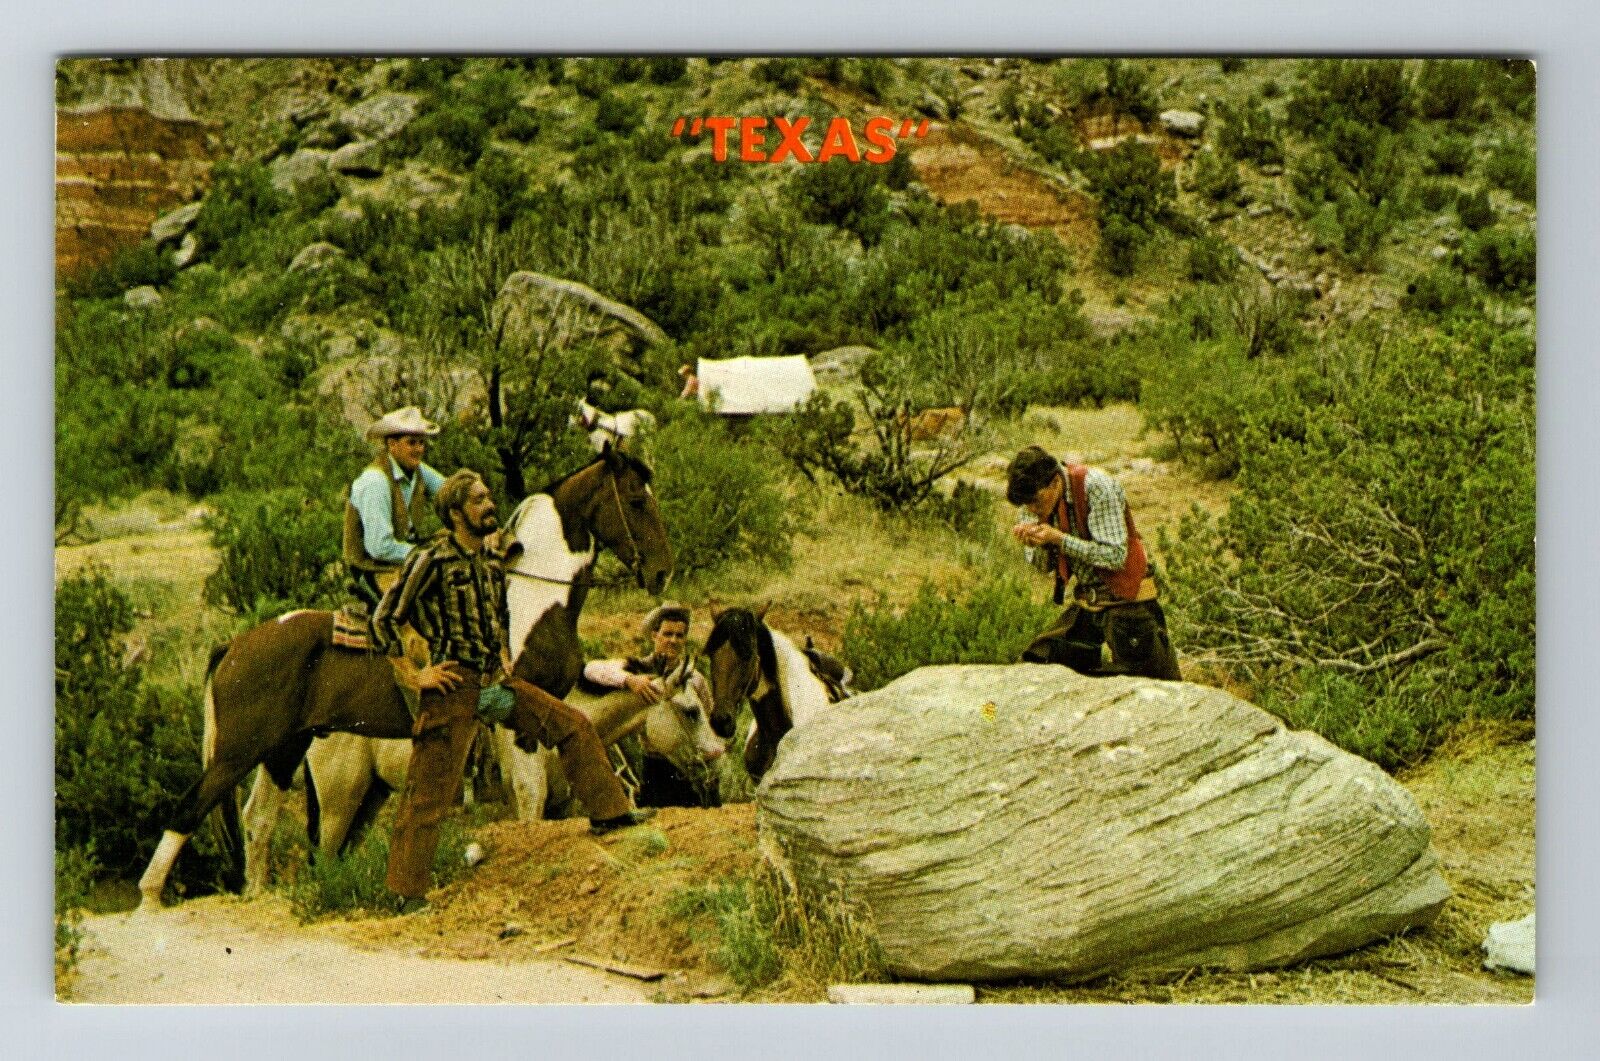 Amarillo TX-Texas, Men And Horses By A Spring, Scenic Nature, Vintage Postcard